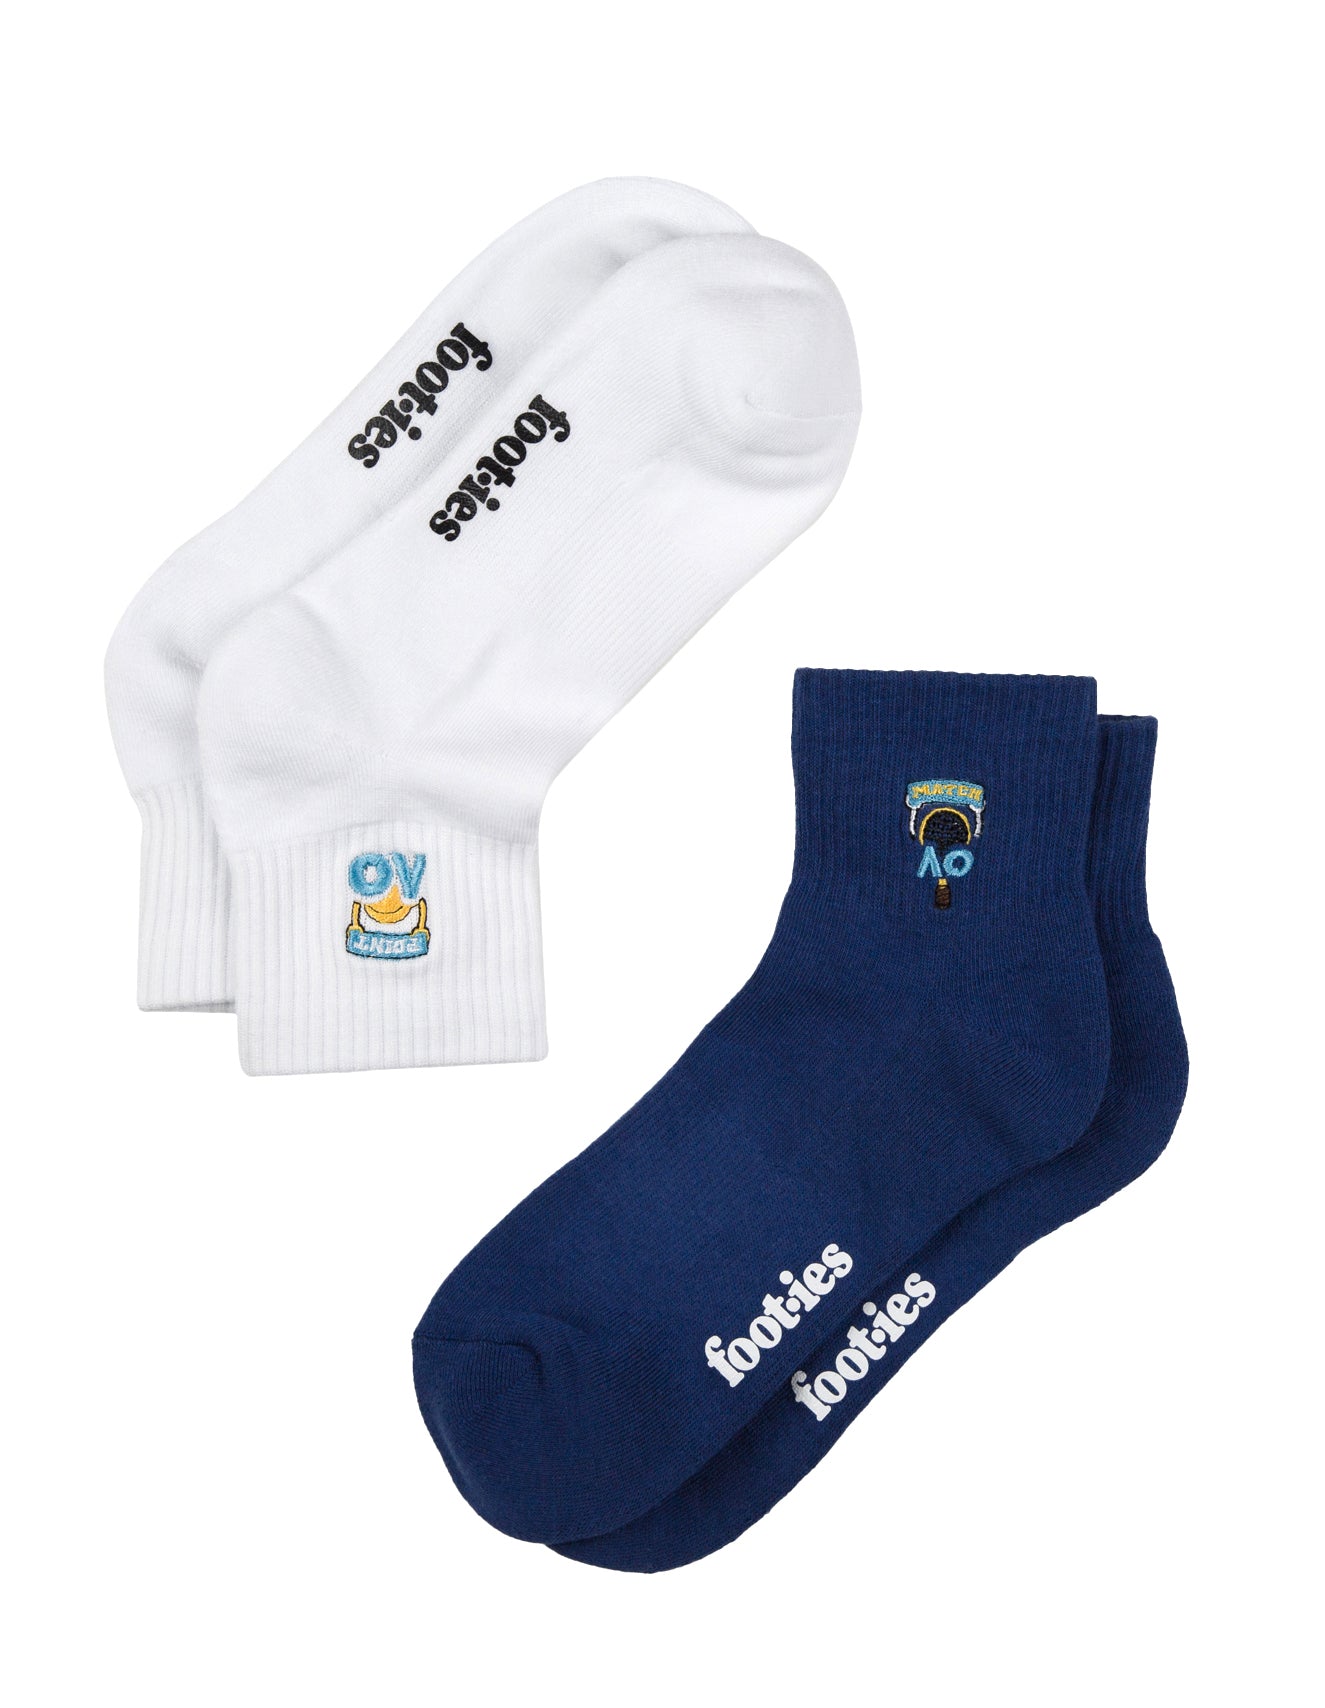 AO Point Match Youth Ankle Sock 2 Pack Socks